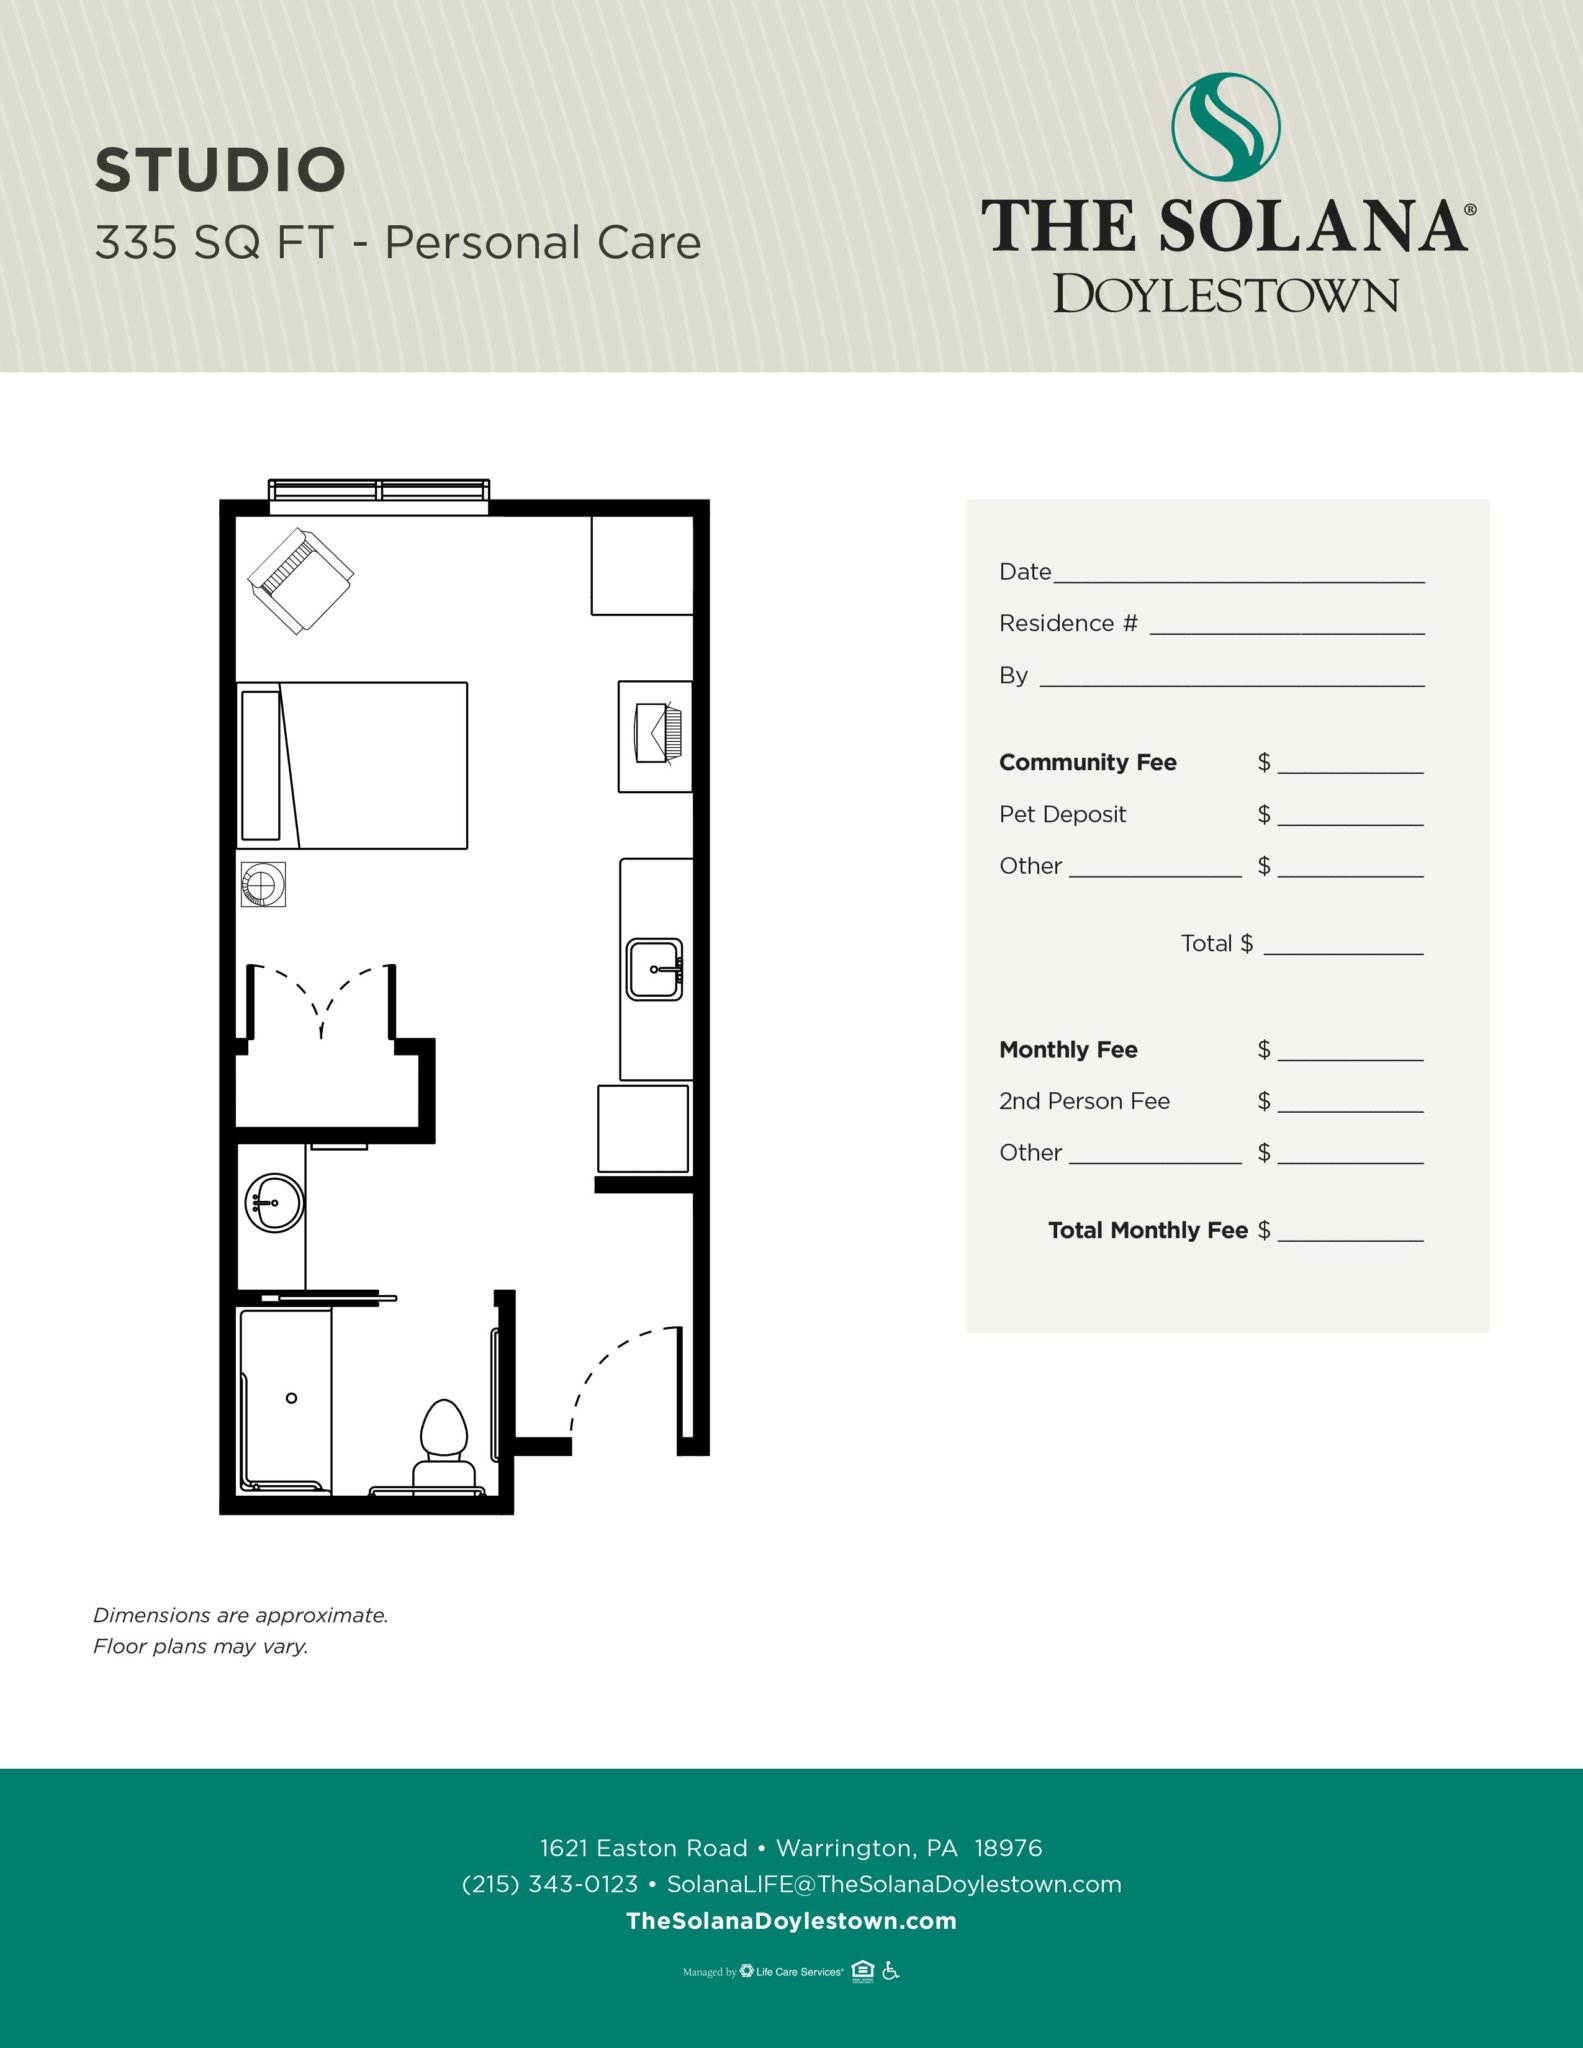 Studio unit floor plan, 335 square feet, with bathroom, living area, and kitchenette.